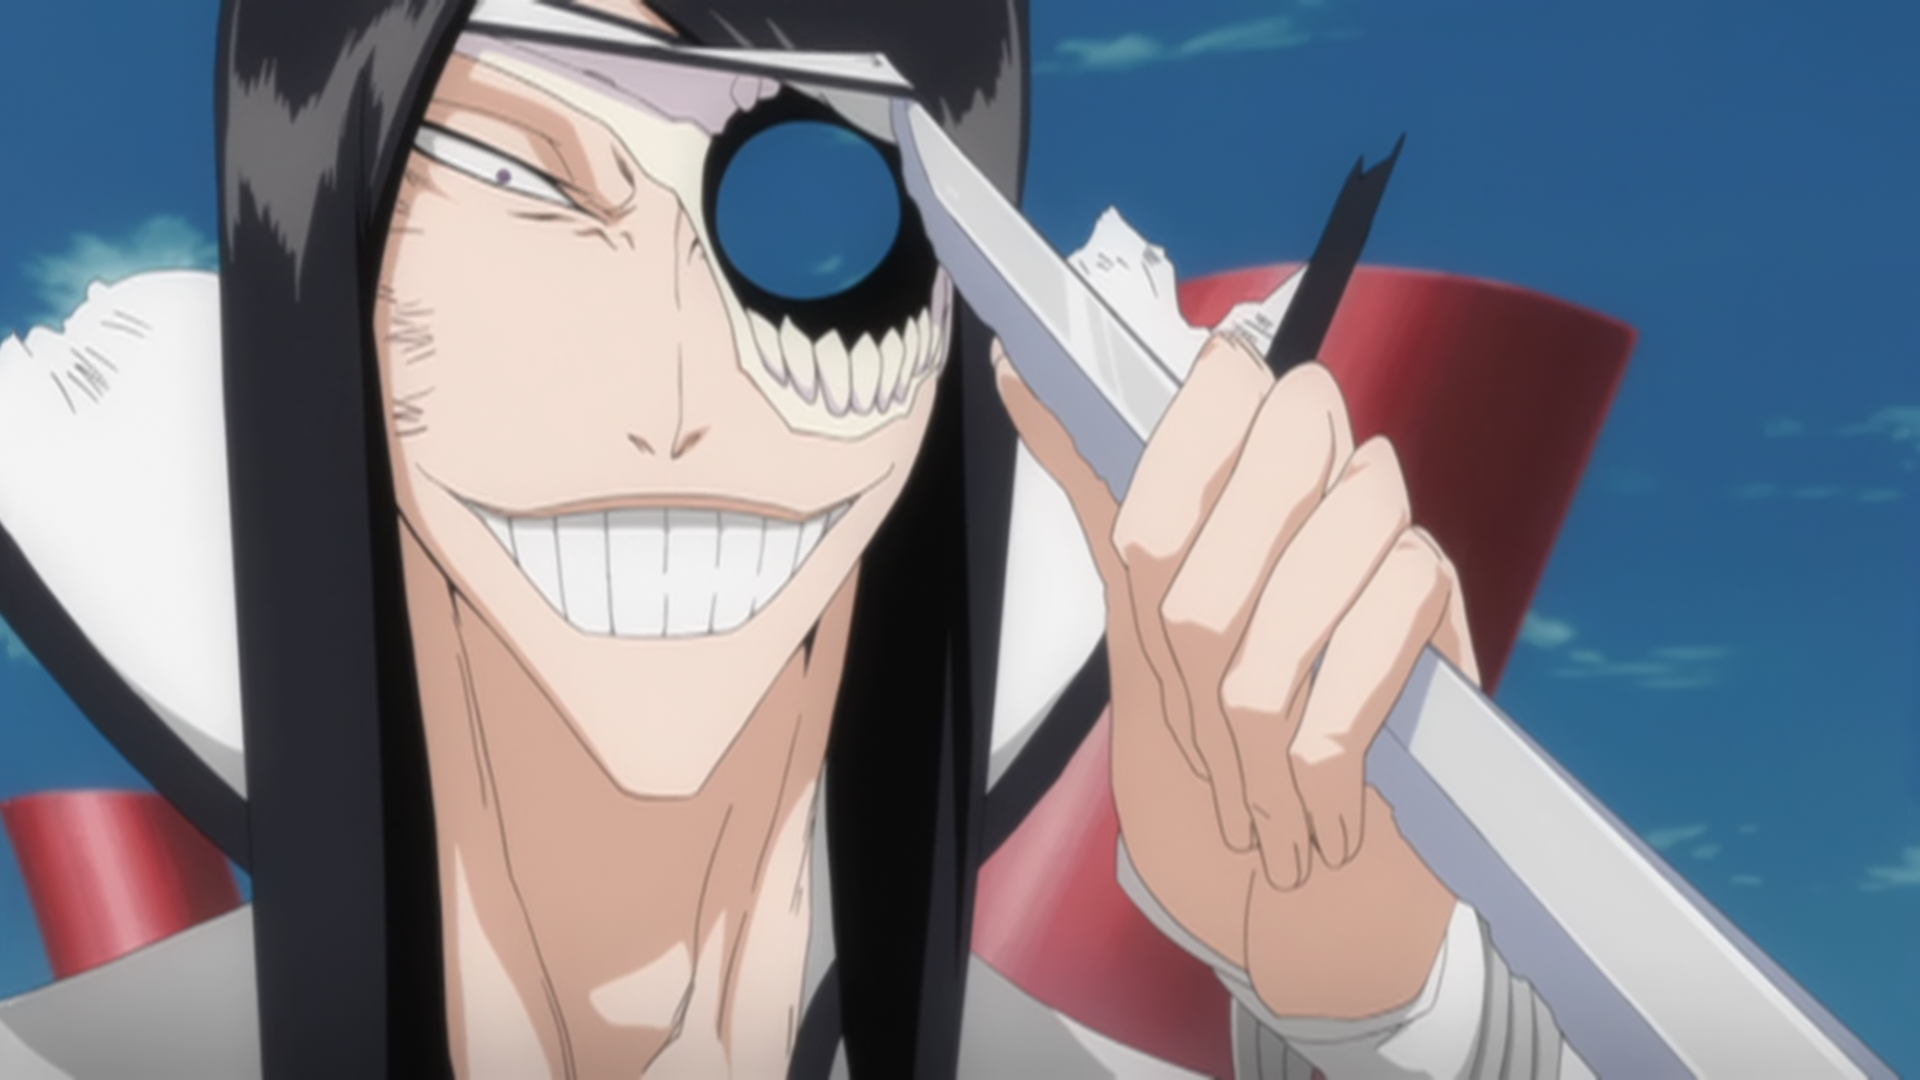 http://images1.wikia.nocookie.net/__cb20100727120506/bleach/en/images/f/f4/Nnoitra%27s_Hole.png